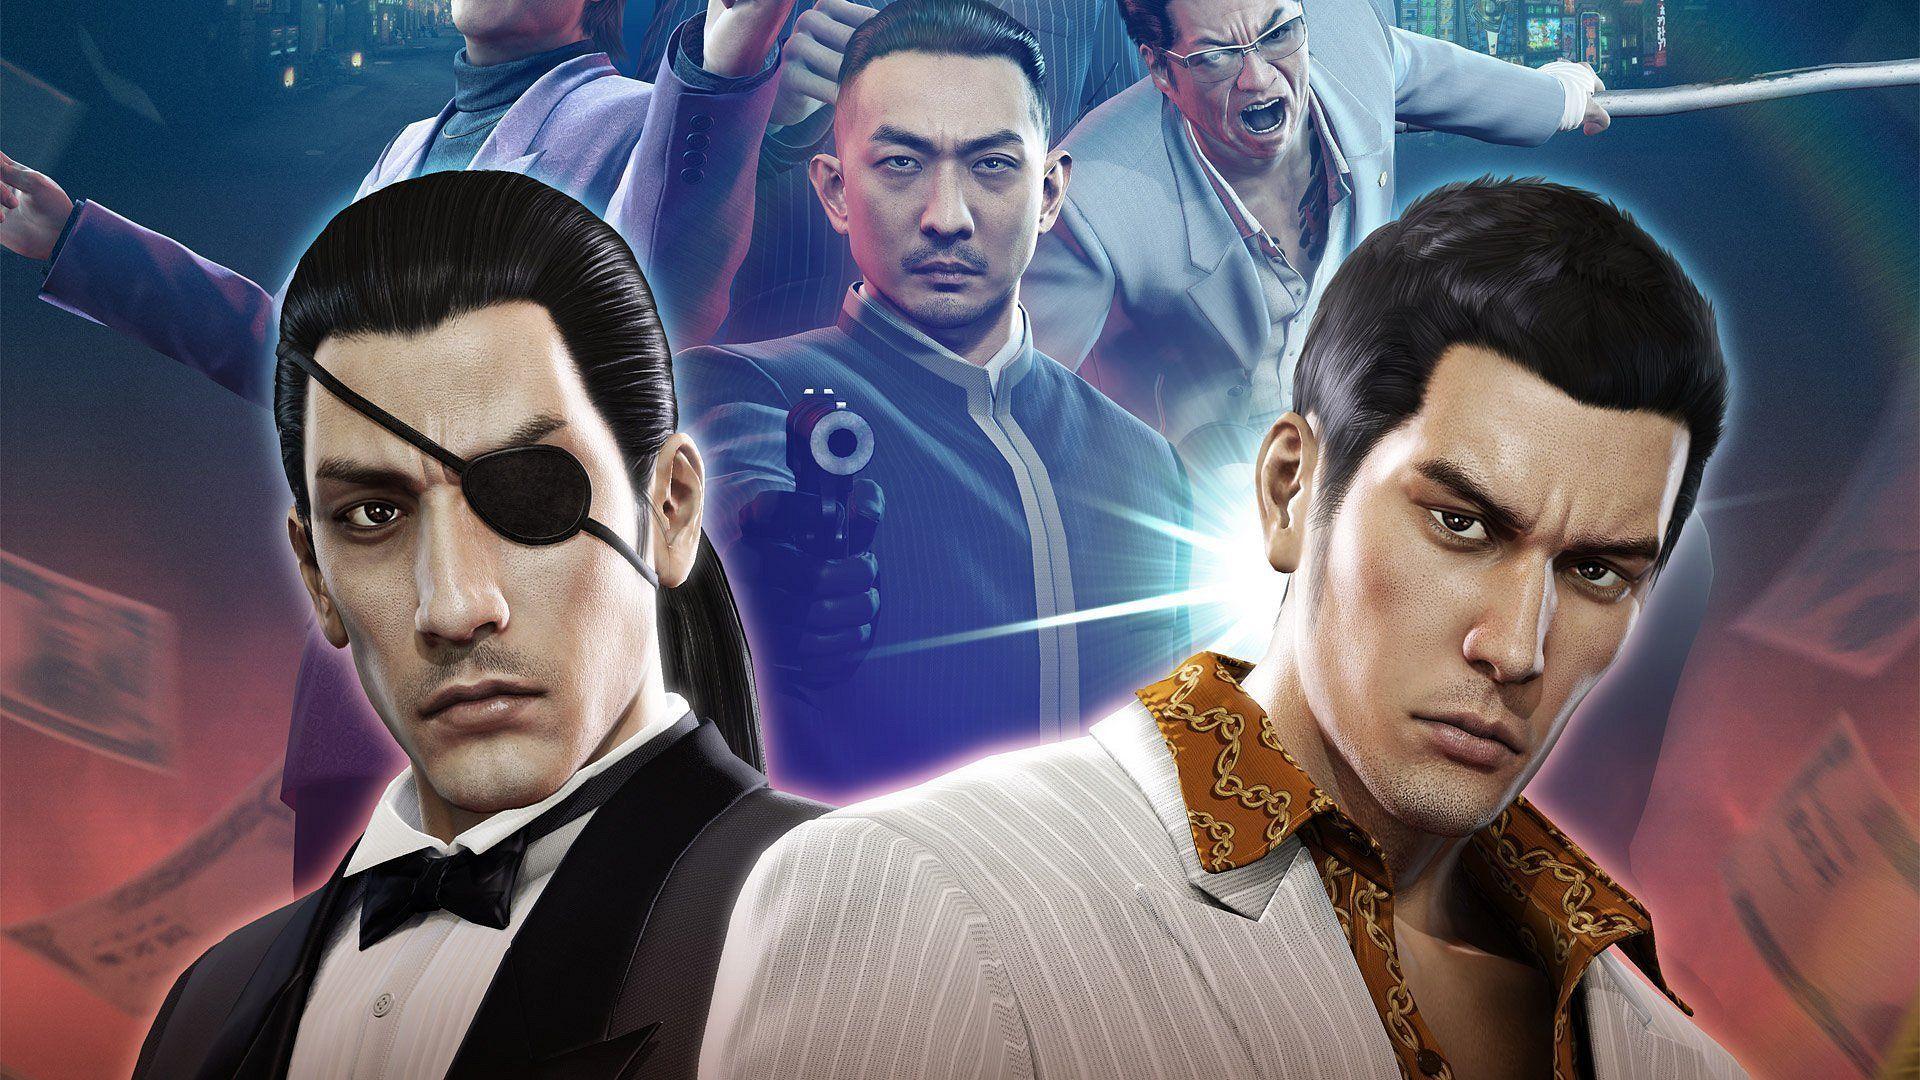 Coming Soon to Xbox Game Pass for Console and PC: Yakuza Kiwami 2